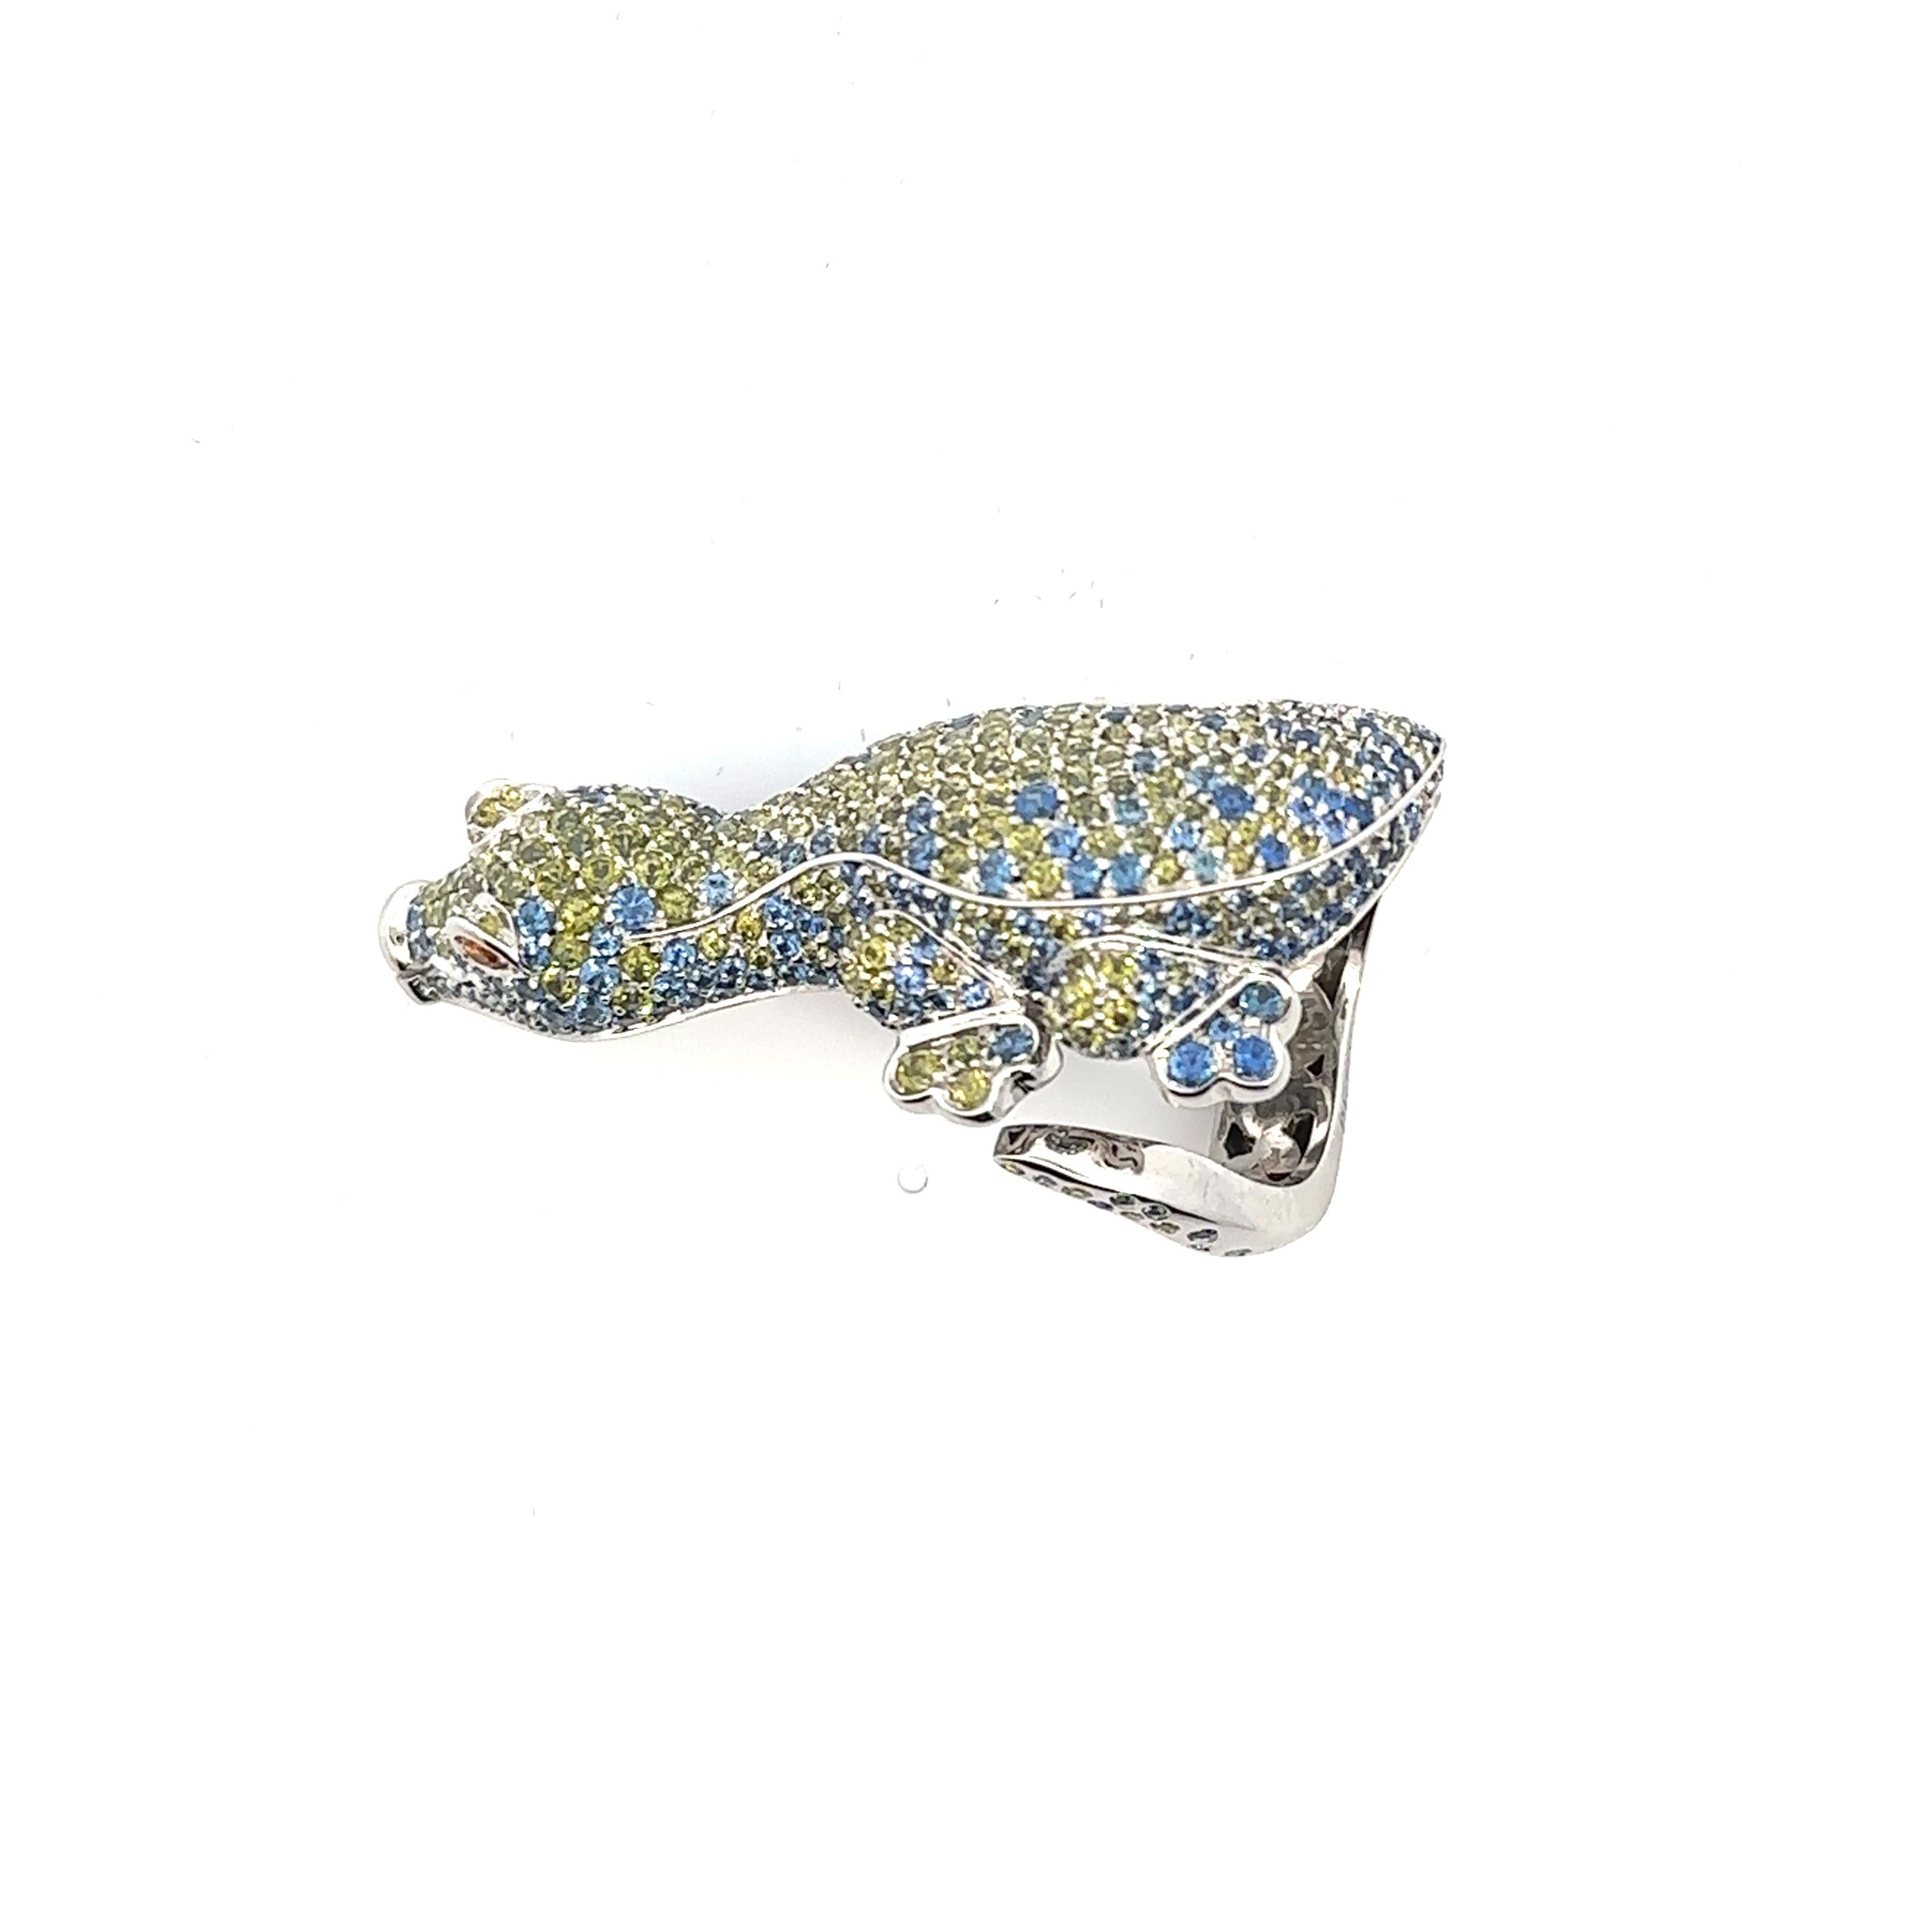 Introducing the rare and stylish Pasquale Bruni Crocodile Ring. Crafted with utmost precision, this masterpiece showcases a mesmerizing crocodile design, its body adorned with a luxurious pavé setting of circular-cut sapphires and green topaz,